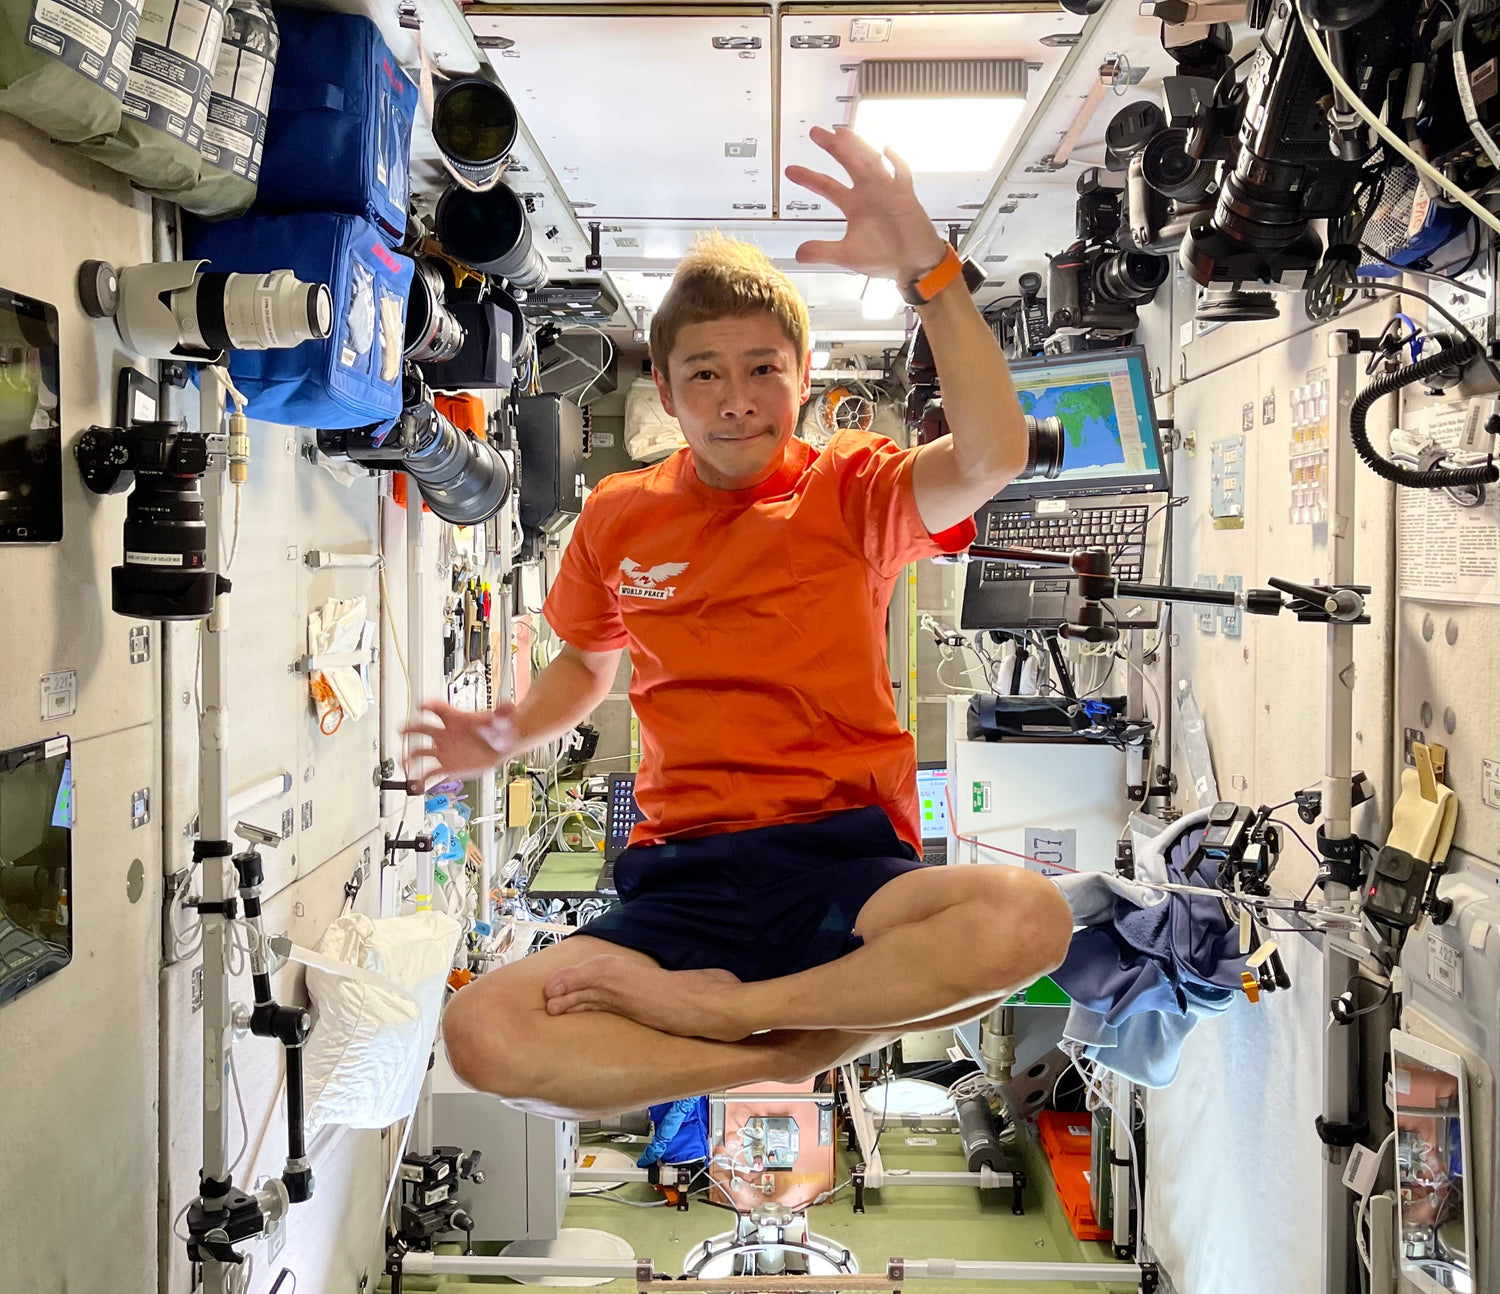 Yusaku Maezawa Shares Videos Of His Twelve-Day Adventure At The Space Station